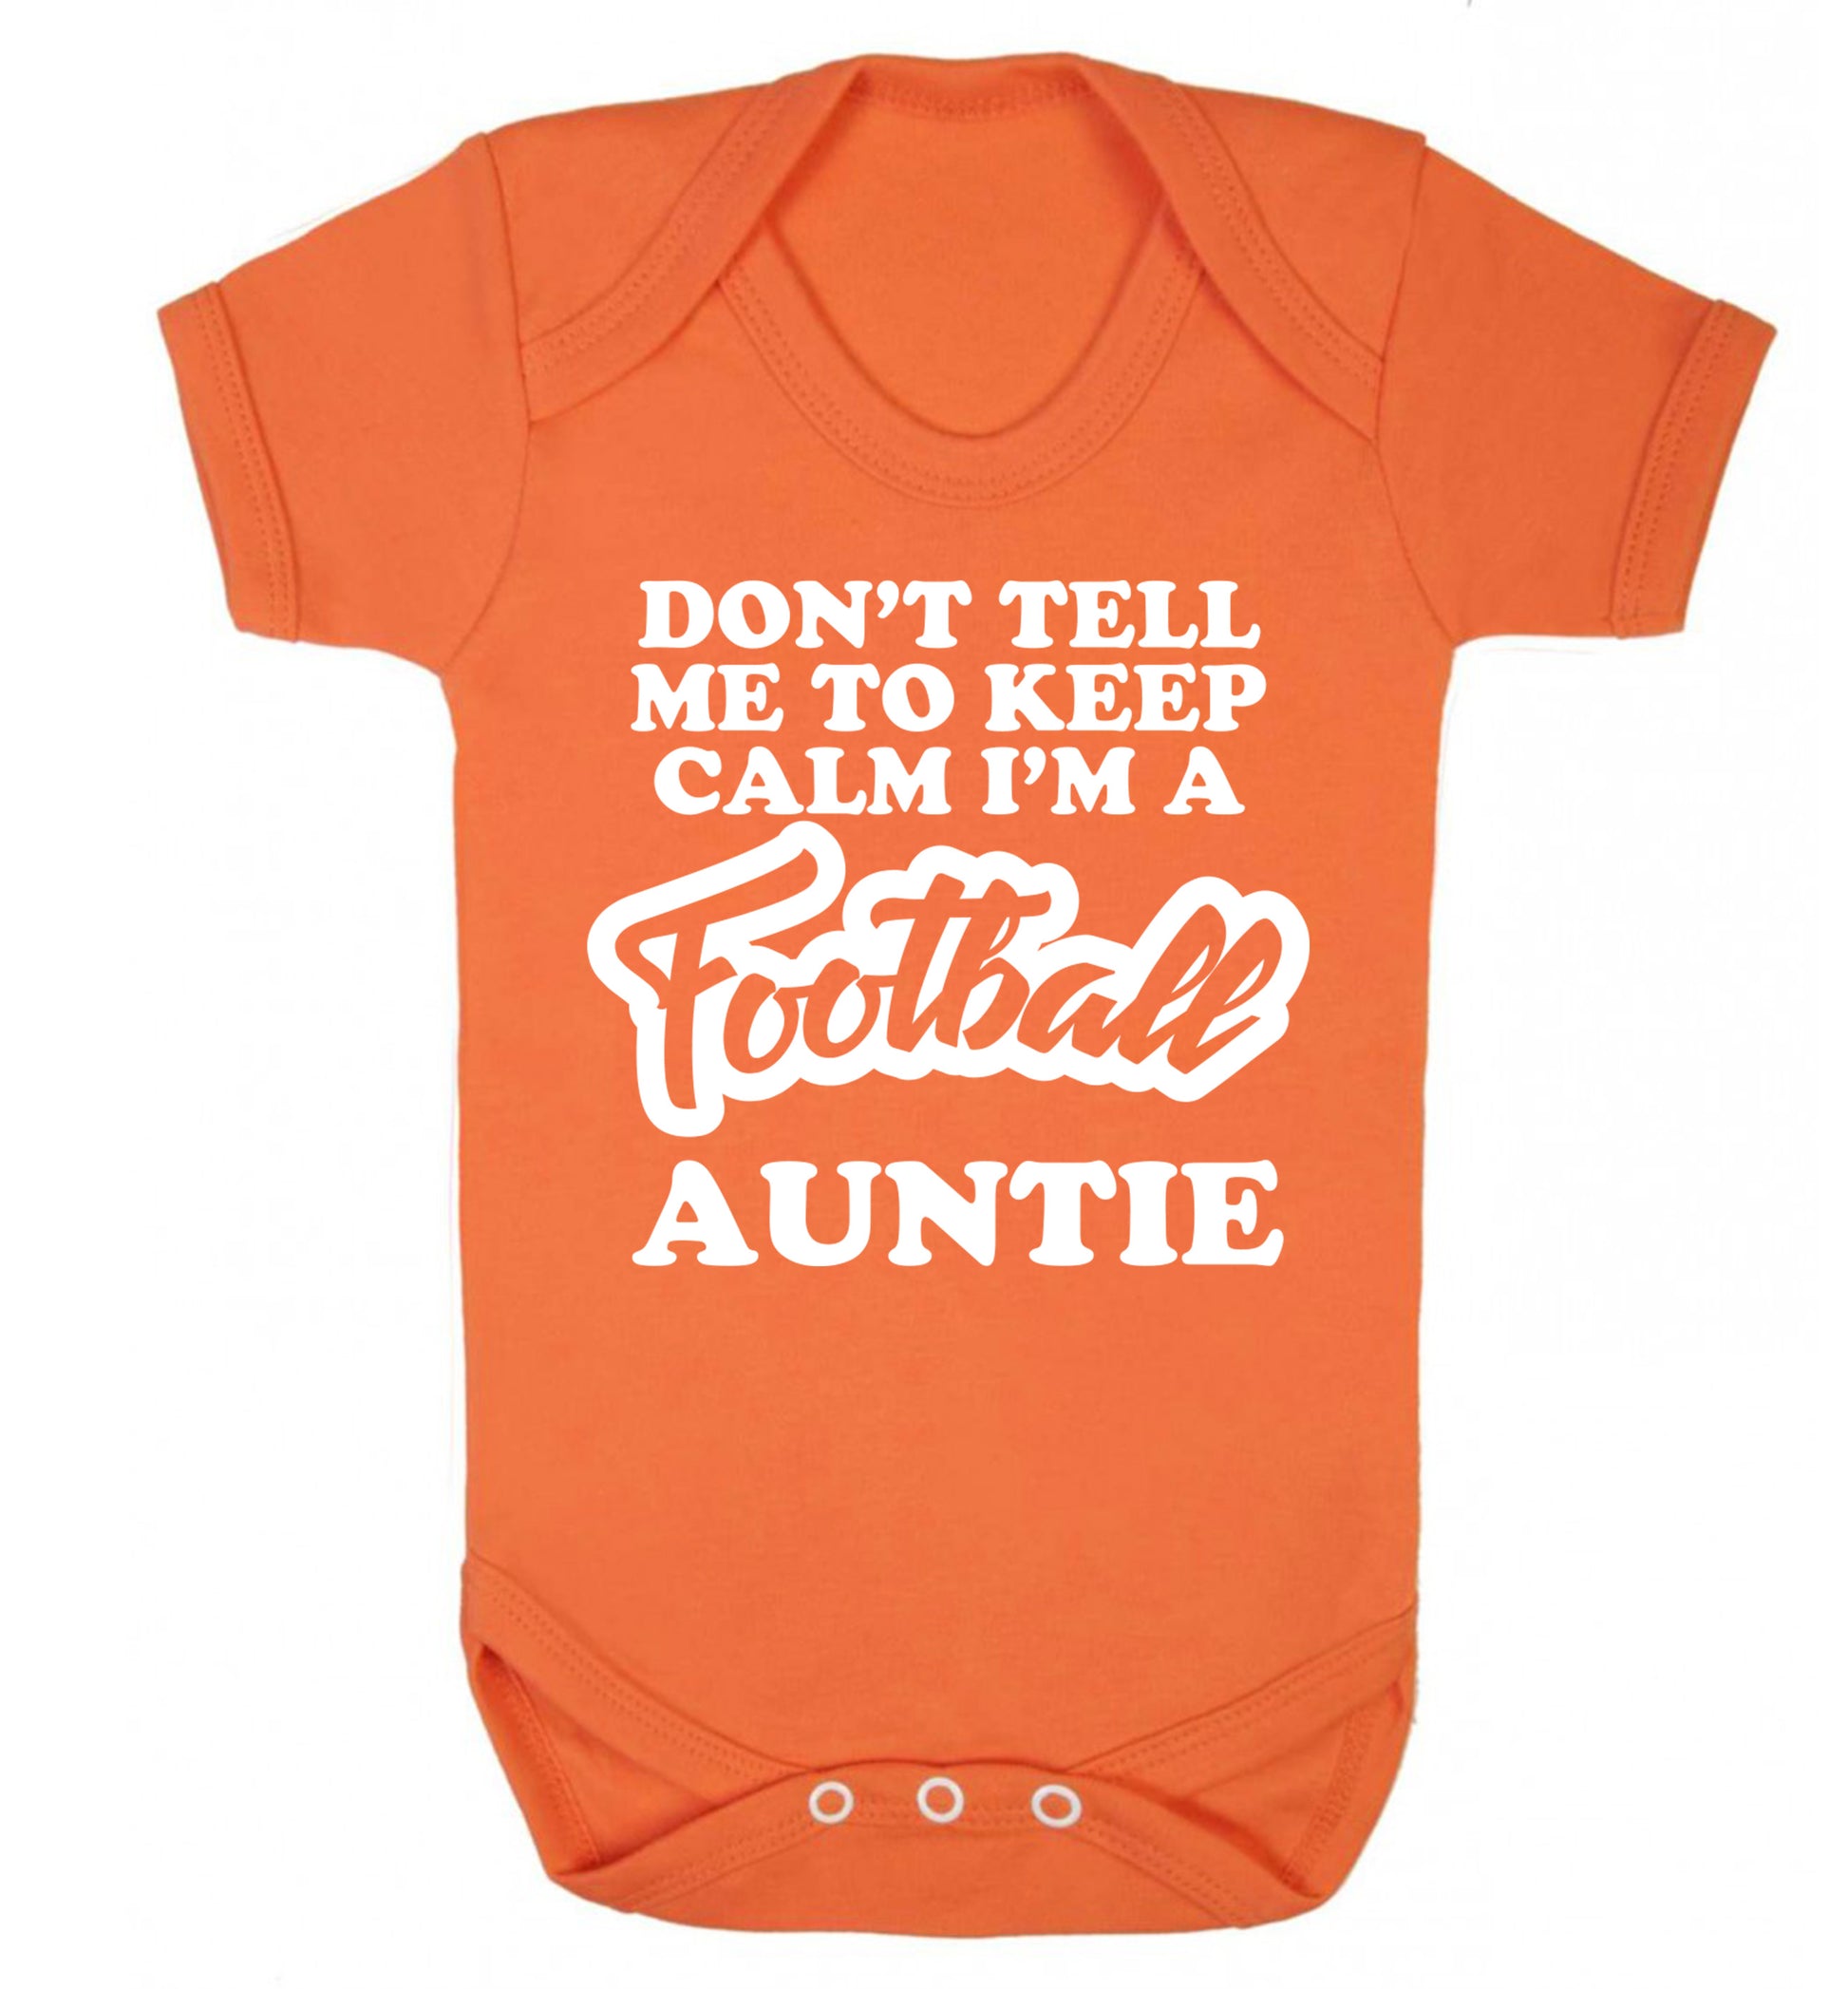 Don't tell me to keep calm I'm a football auntie Baby Vest orange 18-24 months